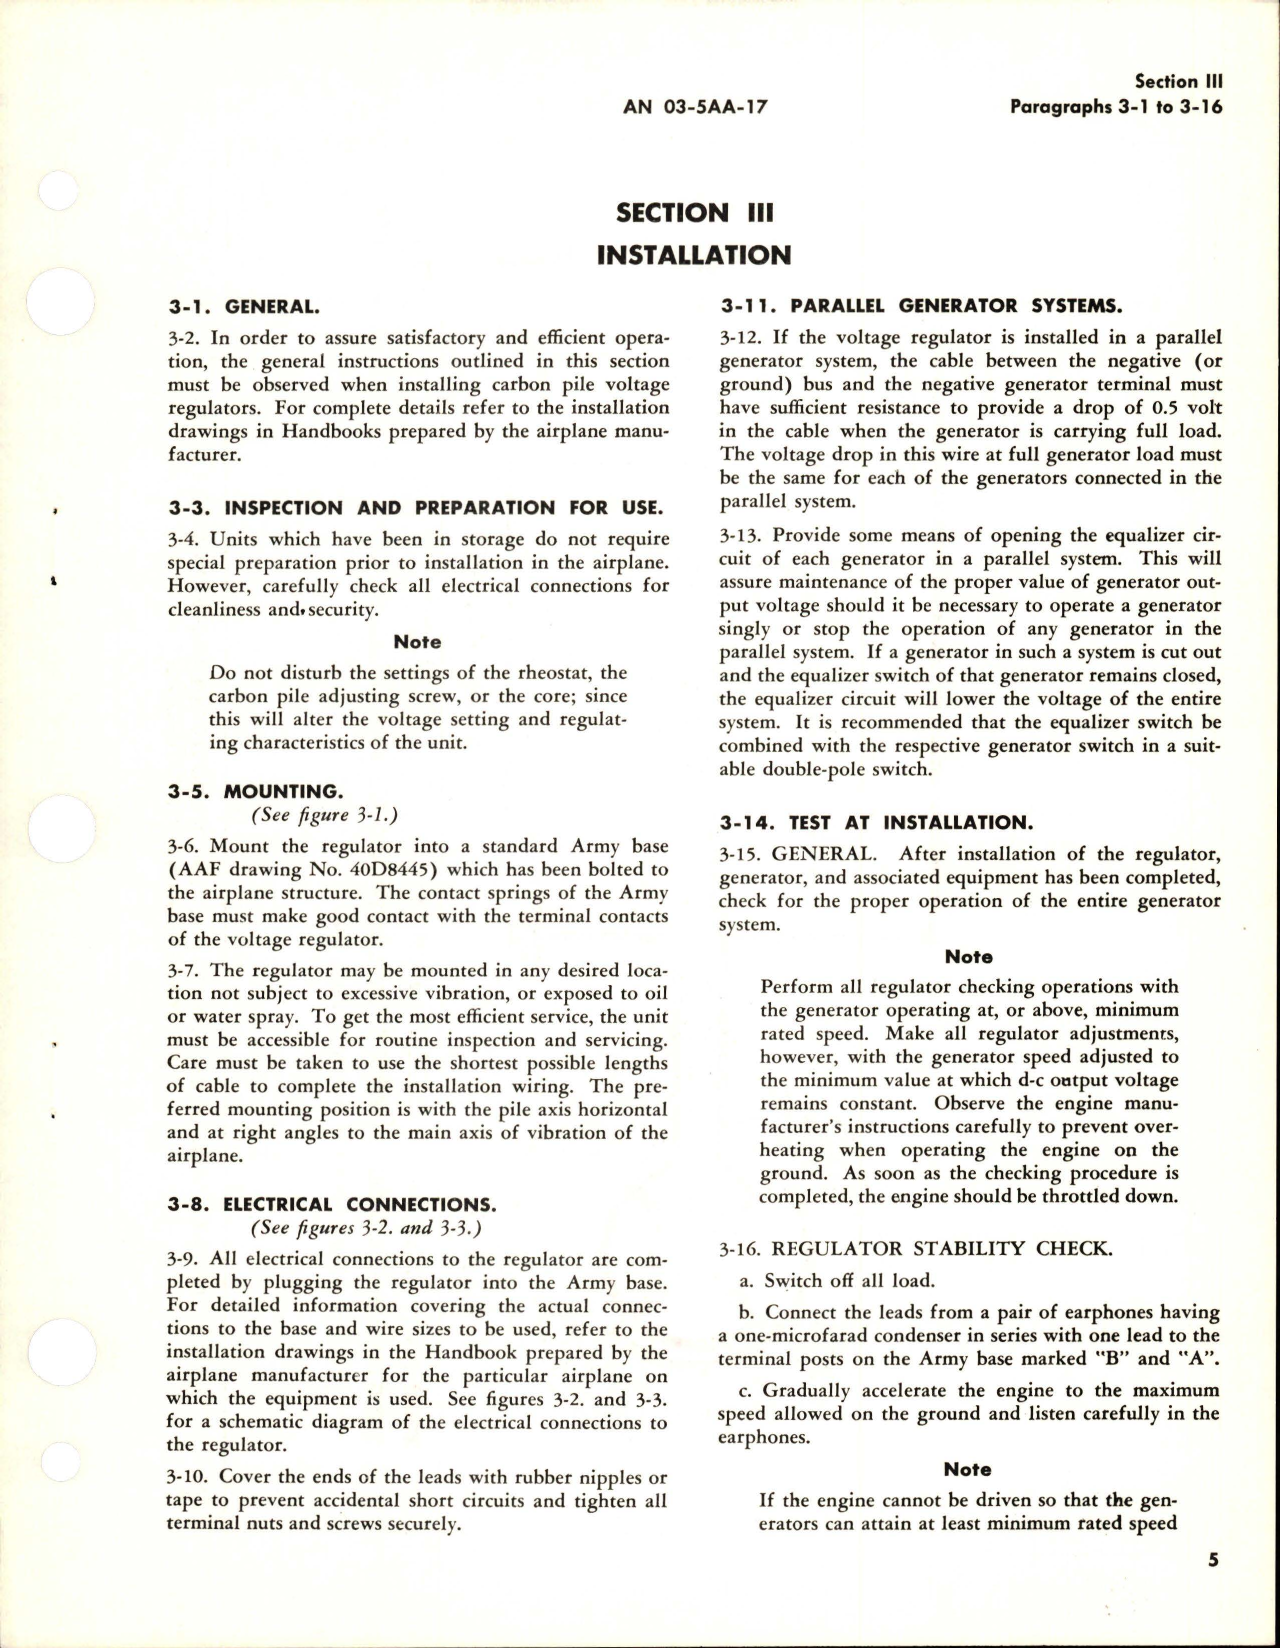 Sample page 9 from AirCorps Library document: Operation, Service, and Overhaul Instructions with Parts Catalog for Carbon Pile Voltage Regulator - 1042-6A and 1042-12A